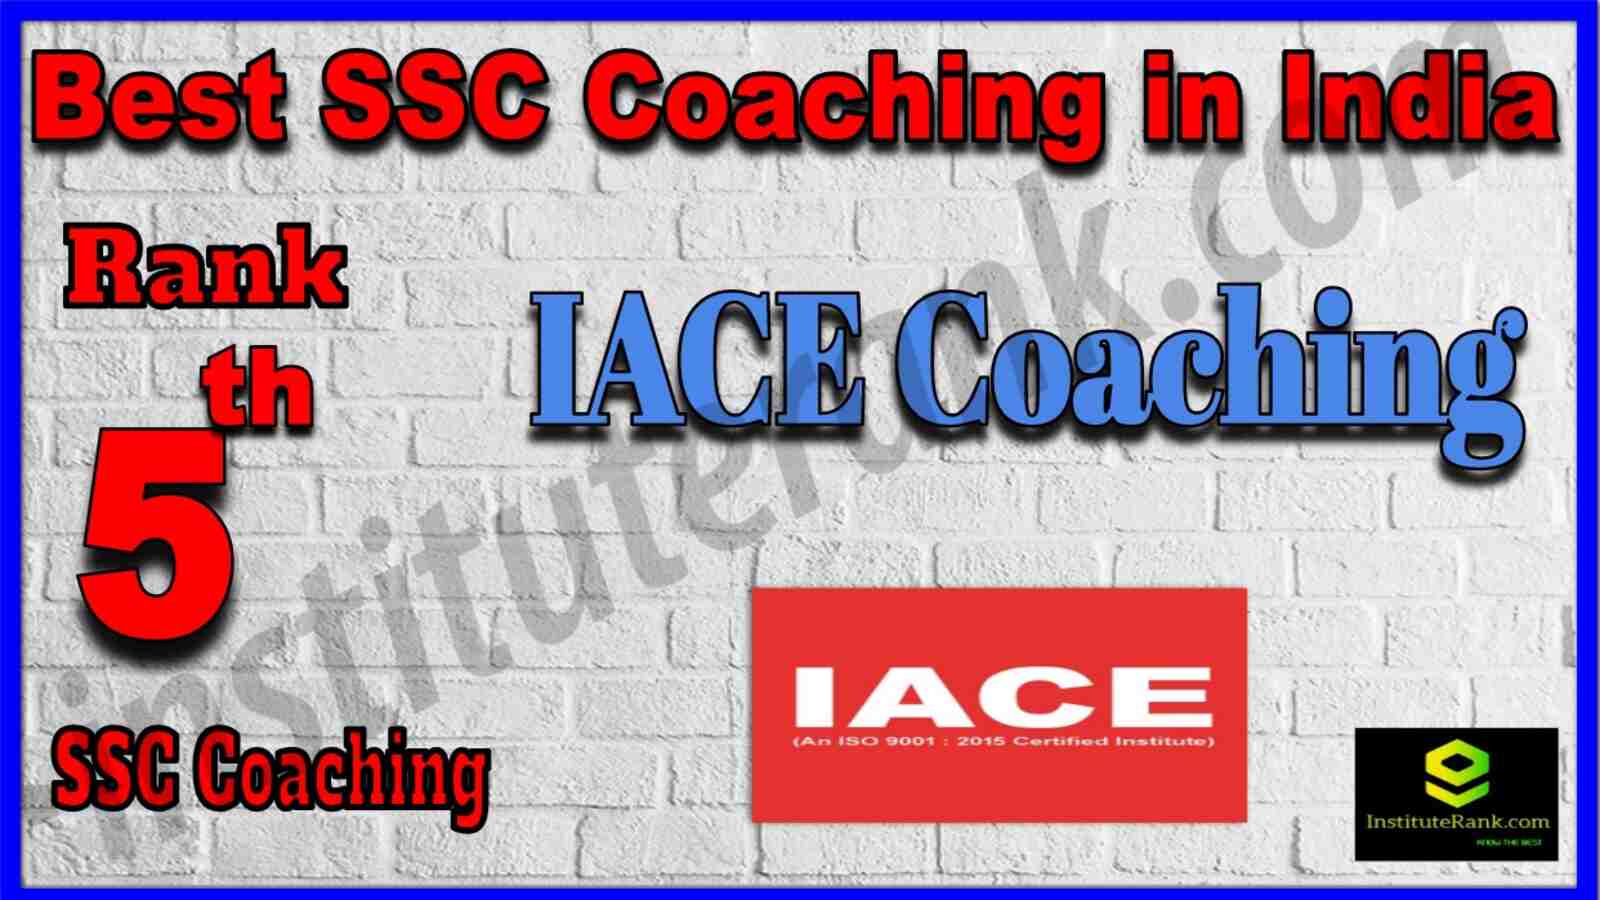 Rank 5 Best SSC Coaching in India